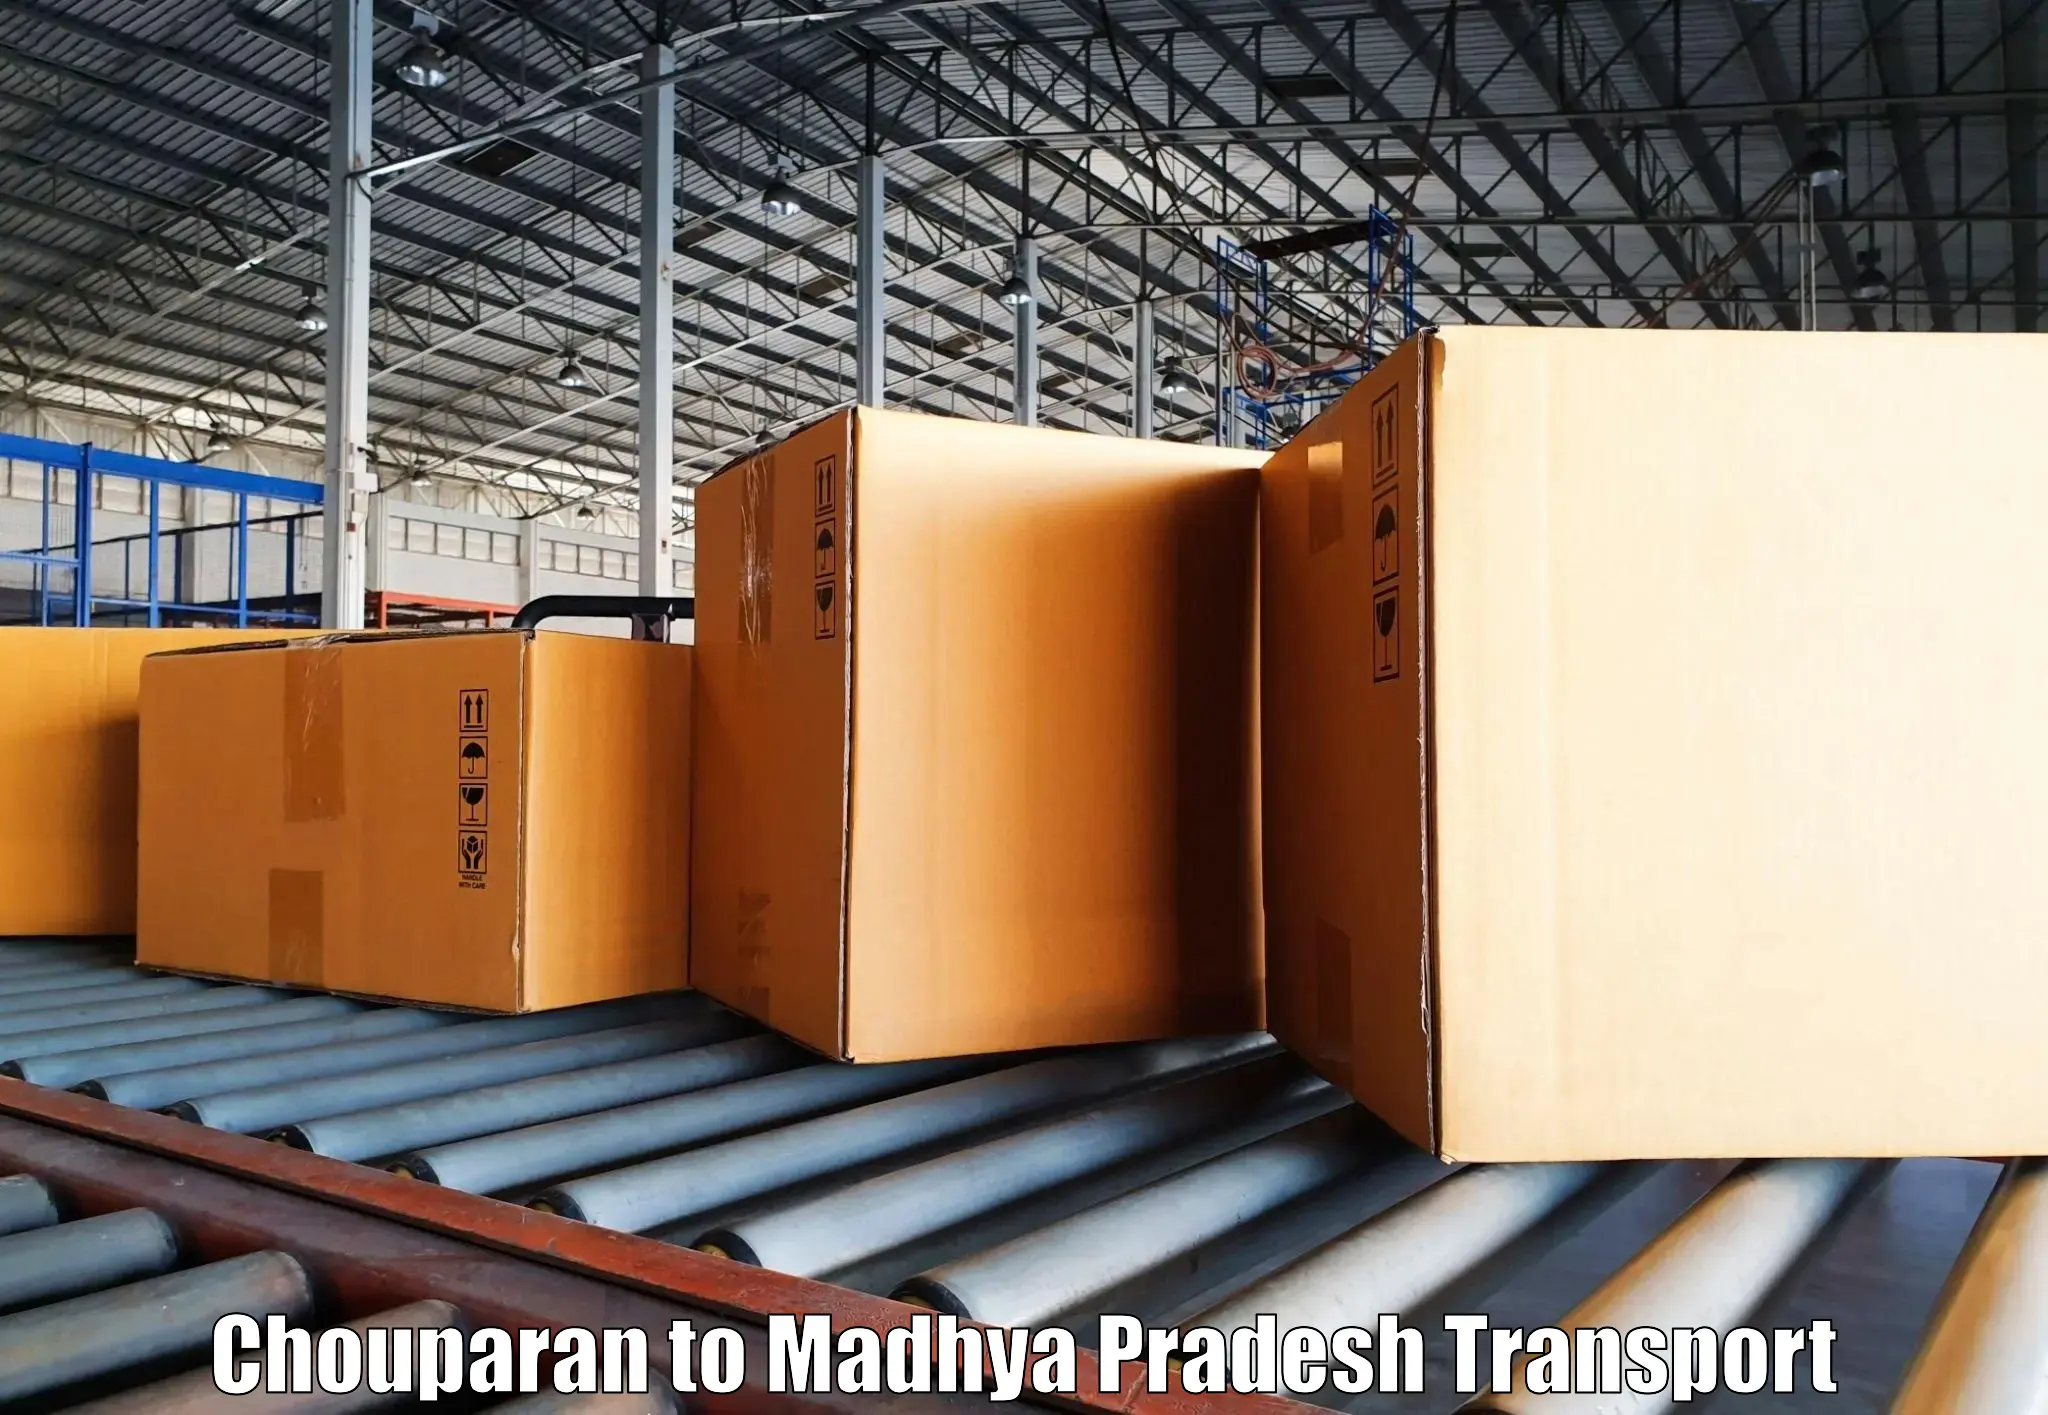 Truck transport companies in India Chouparan to Khandwa